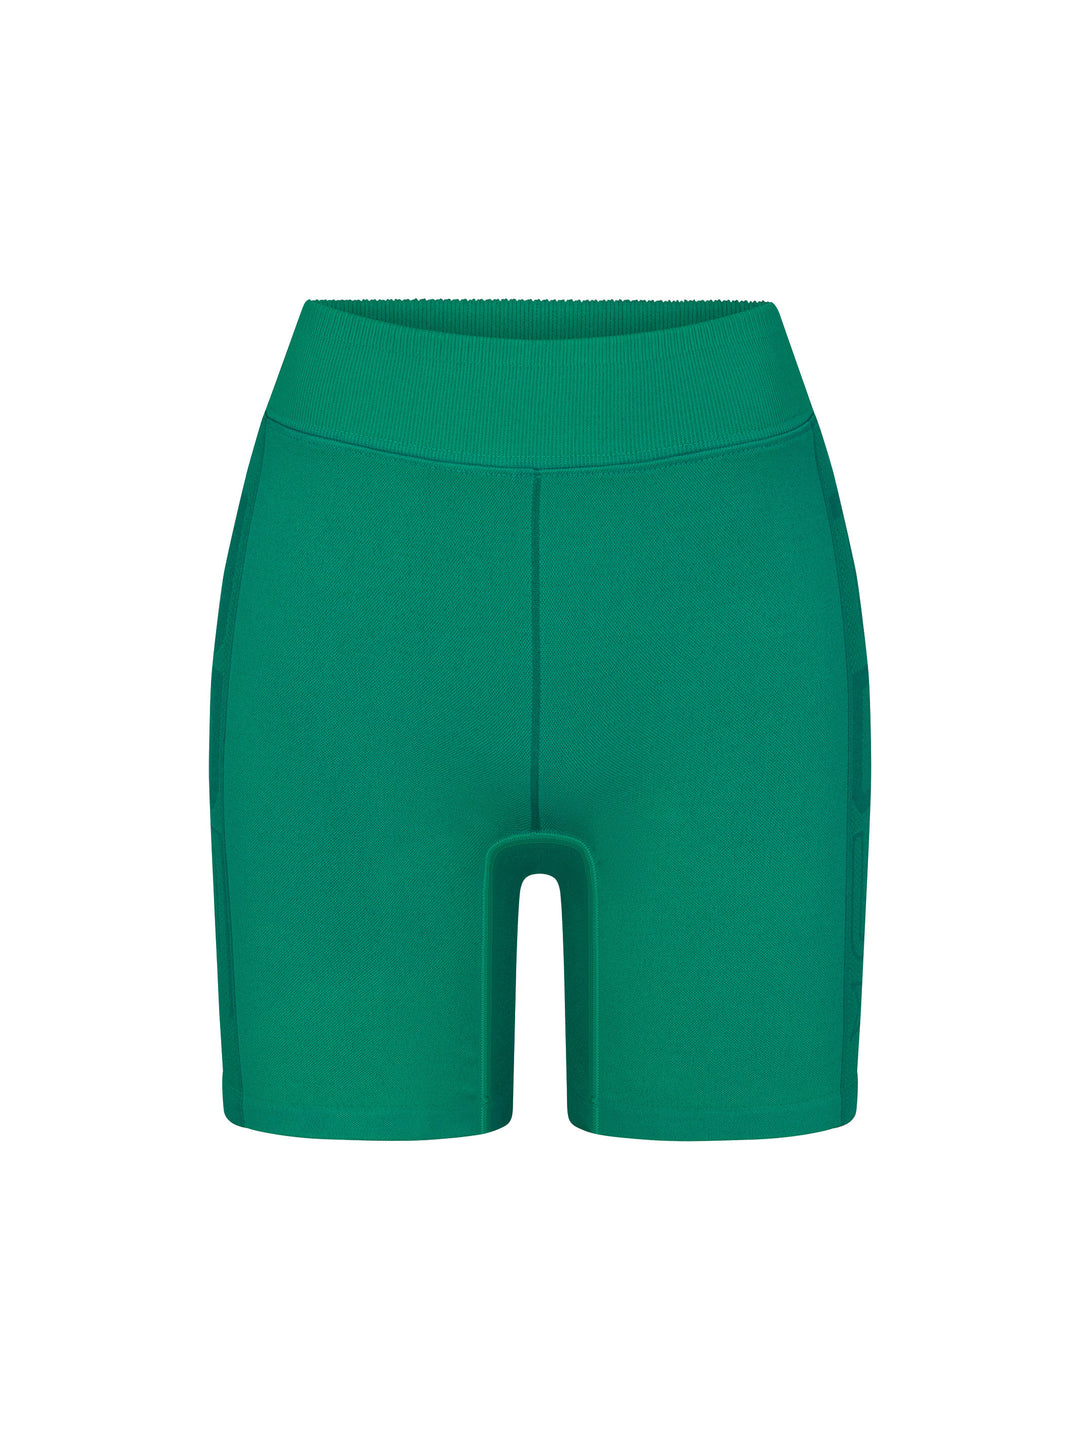 Women's Compression Short front view in jade.